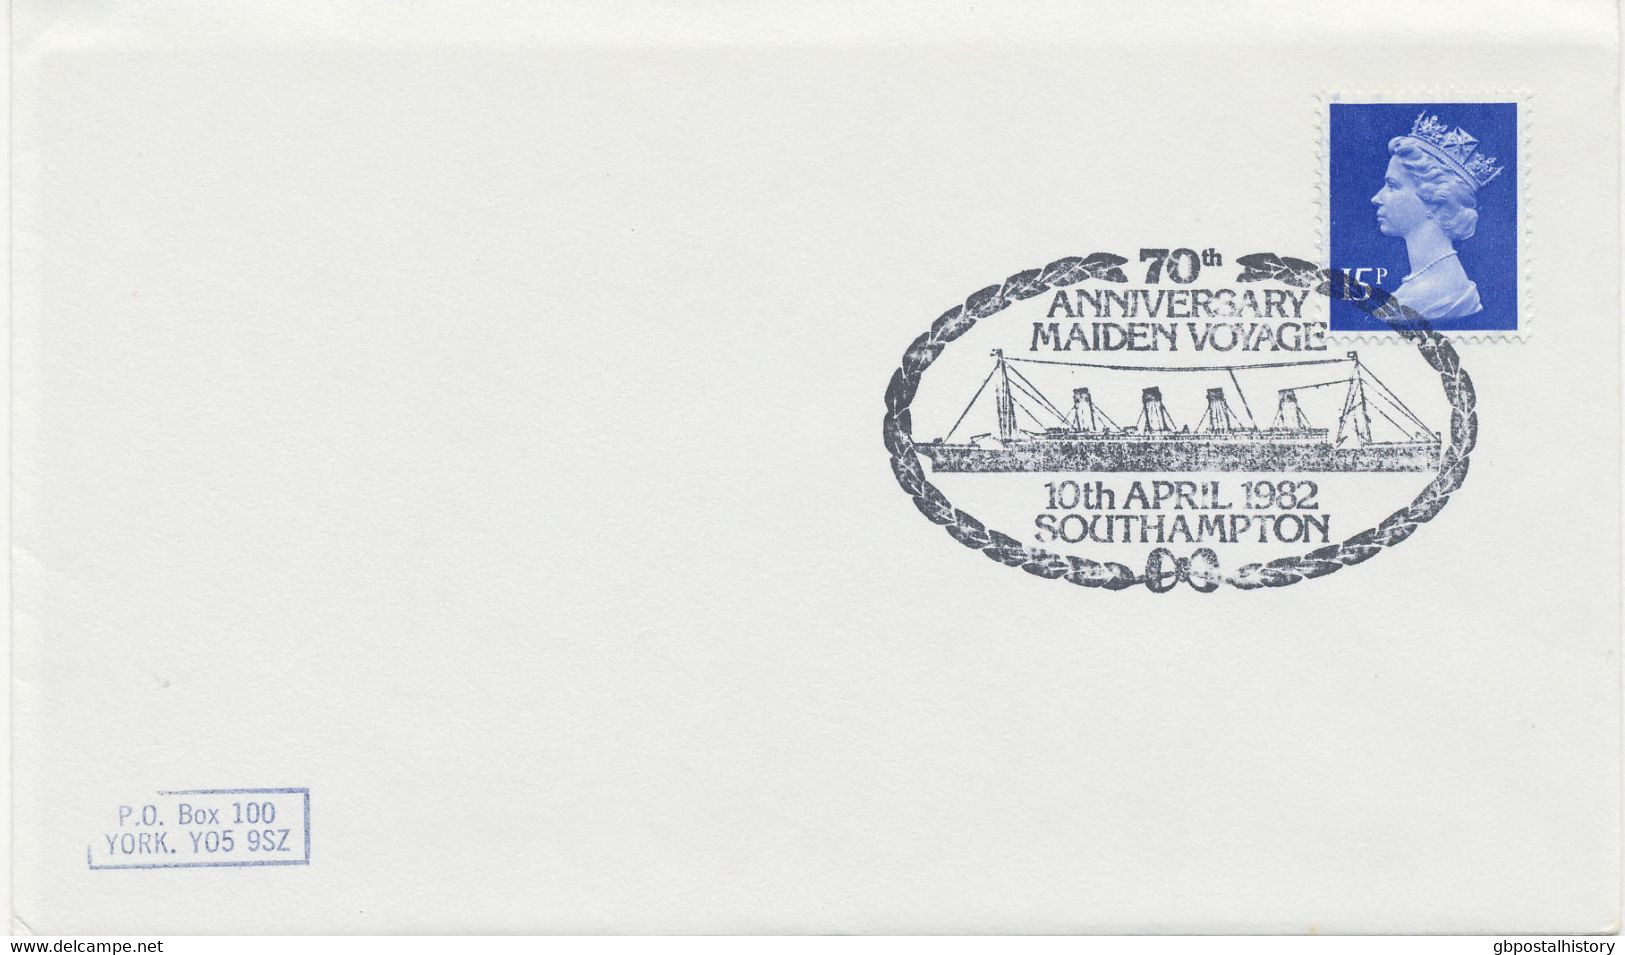 GB SPECIAL EVENT POSTMARKS 70th ANNIVERSARY MAIDEN VOYAGE 10th APRIL 1982 SOUTHAMPTON (RMS TITANIC) - Marcophilie